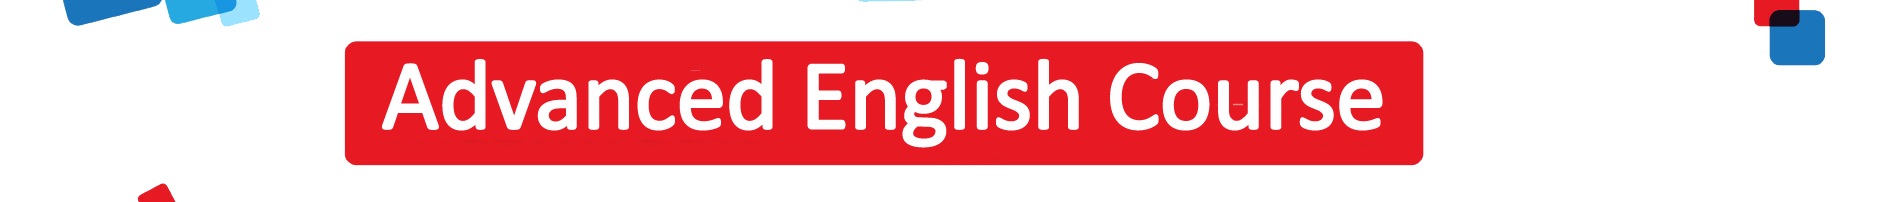 Advanced English Course Online